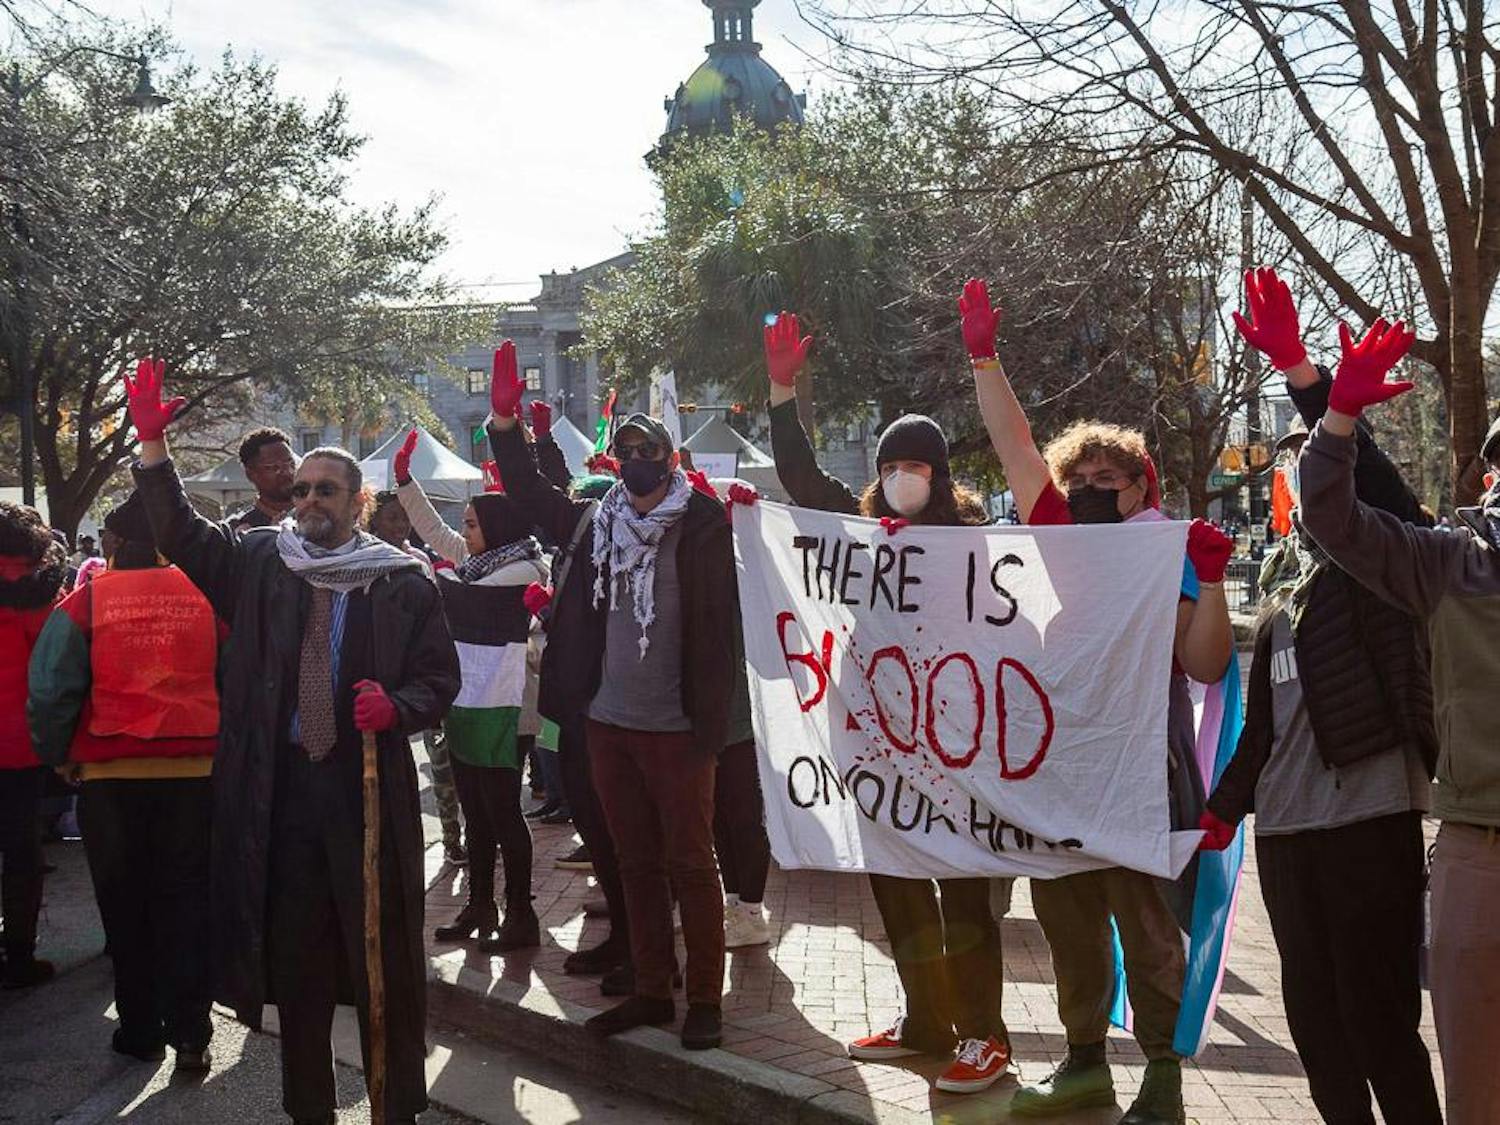 Protestors hold up painted gloves and a banner reading “There is blood on our hands” protesting for the end of the Israel-Palestine War outside of the South Carolina Statehouse on Jan. 15, 2024. Several groups including the Carolina Peace Contingent took part in the civil rights march to call for an end to the conflict.